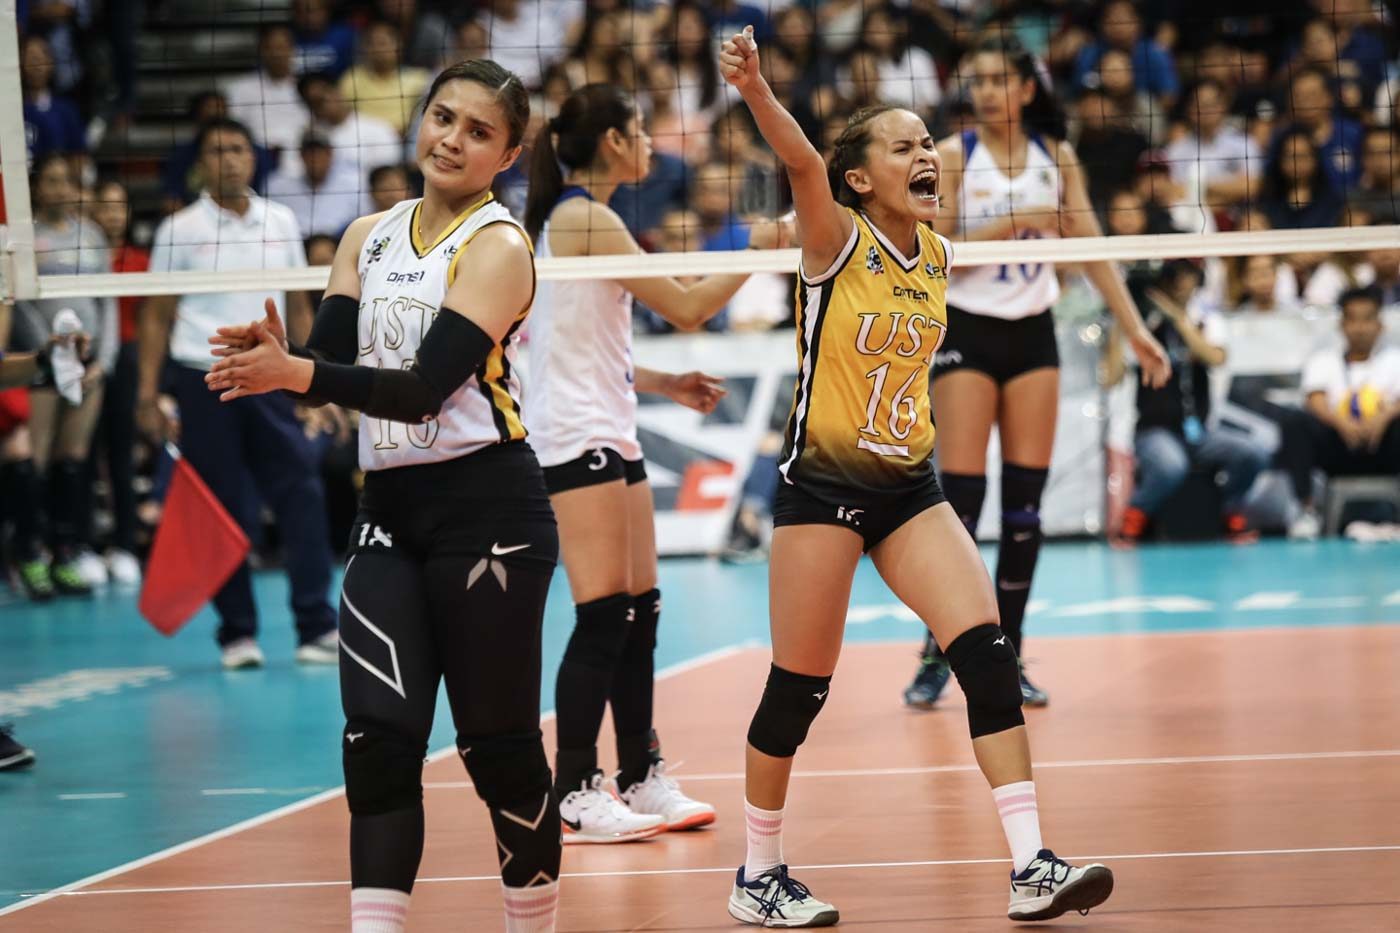 No regrets for MVP Rondina after losing in front of family